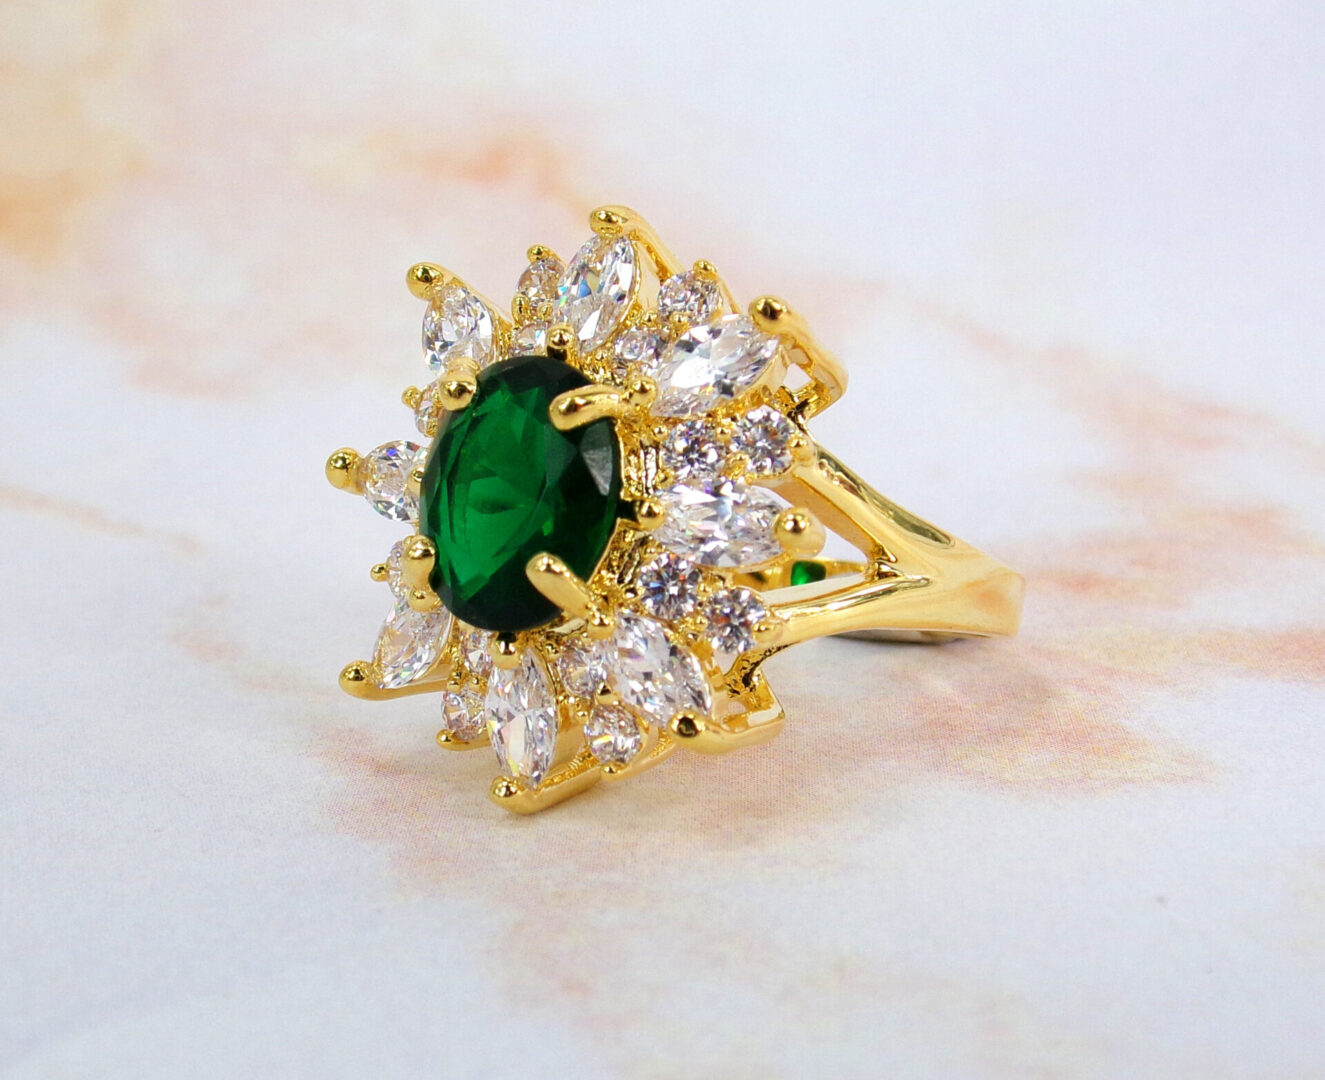 GREEN AND CLEAR SPARKLING CUBIC ZIRCONIA RING - Calisa Designs